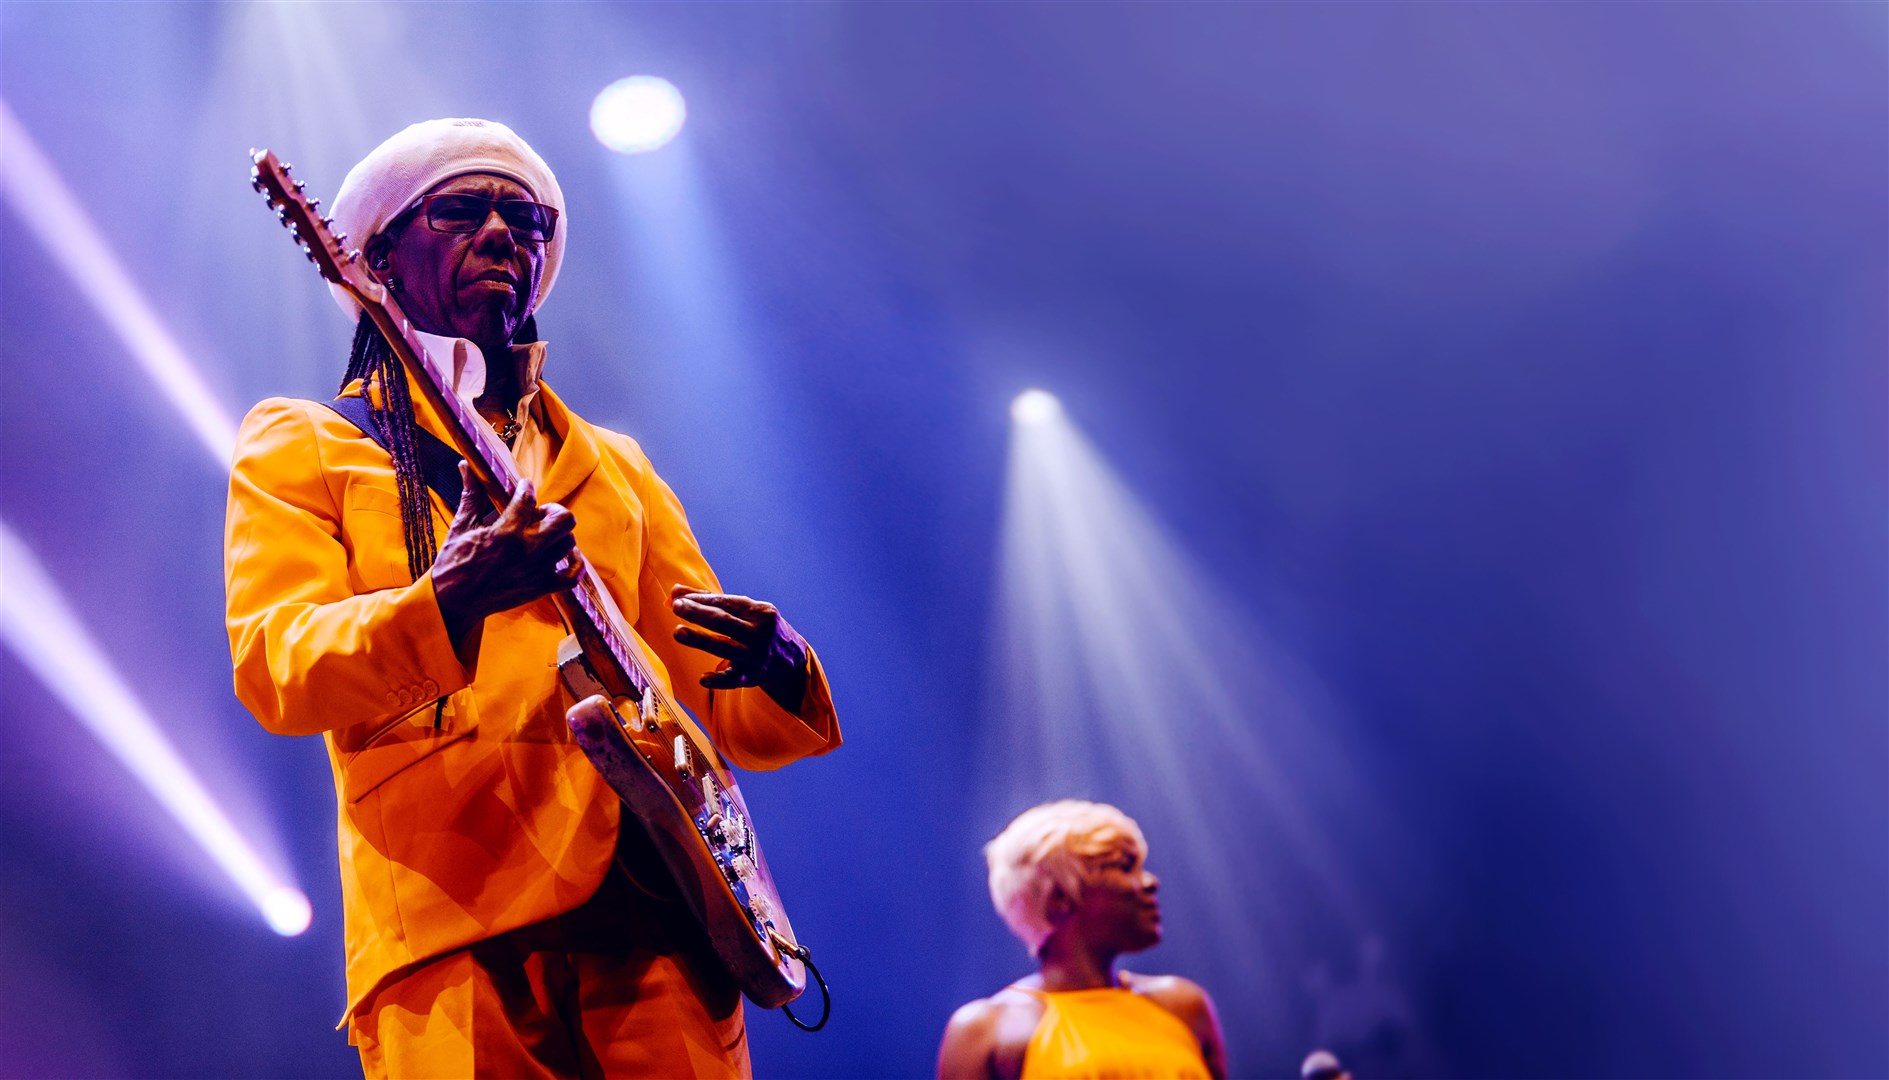 Nile Rodgers and Chic thrilled the crowd as one of this year's headliners.